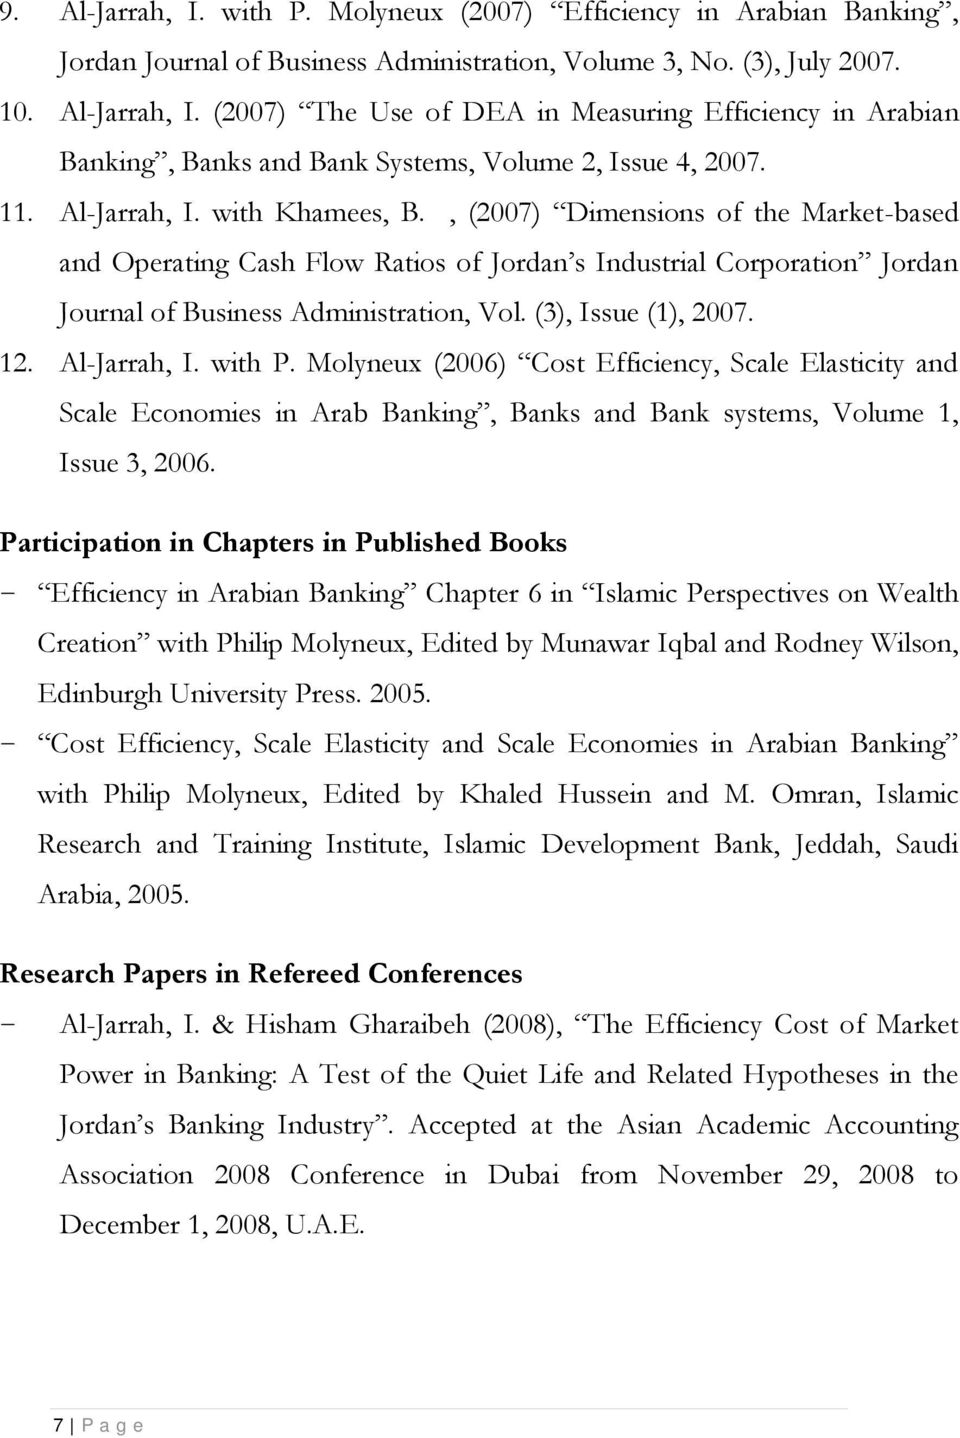 Al-Jarrah, I. with P. Molyneux (2006) Cost Efficiency, Scale Elasticity and Scale Economies in Arab Banking, Banks and Bank systems, Volume 1, Issue 3, 2006.